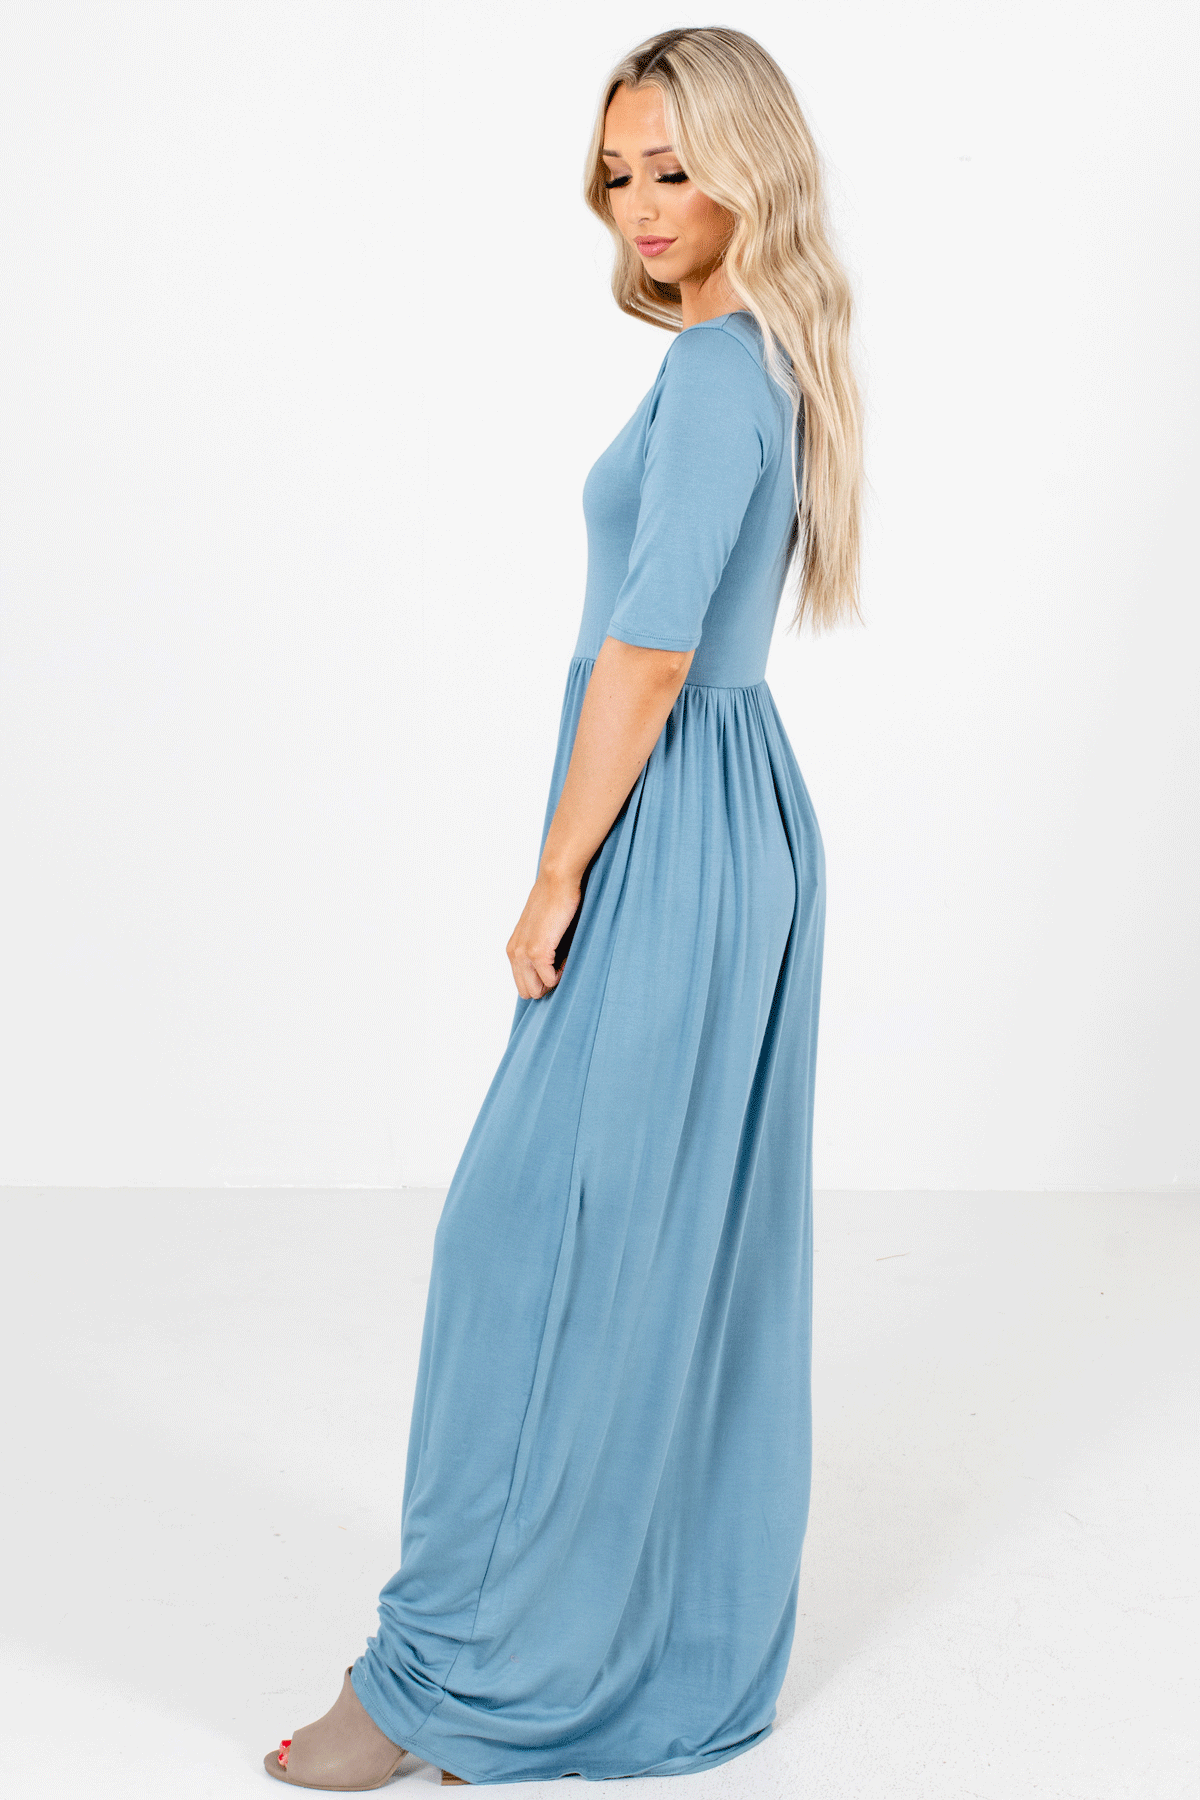 Blue Boutique Maxi Dresses with Pockets for Women